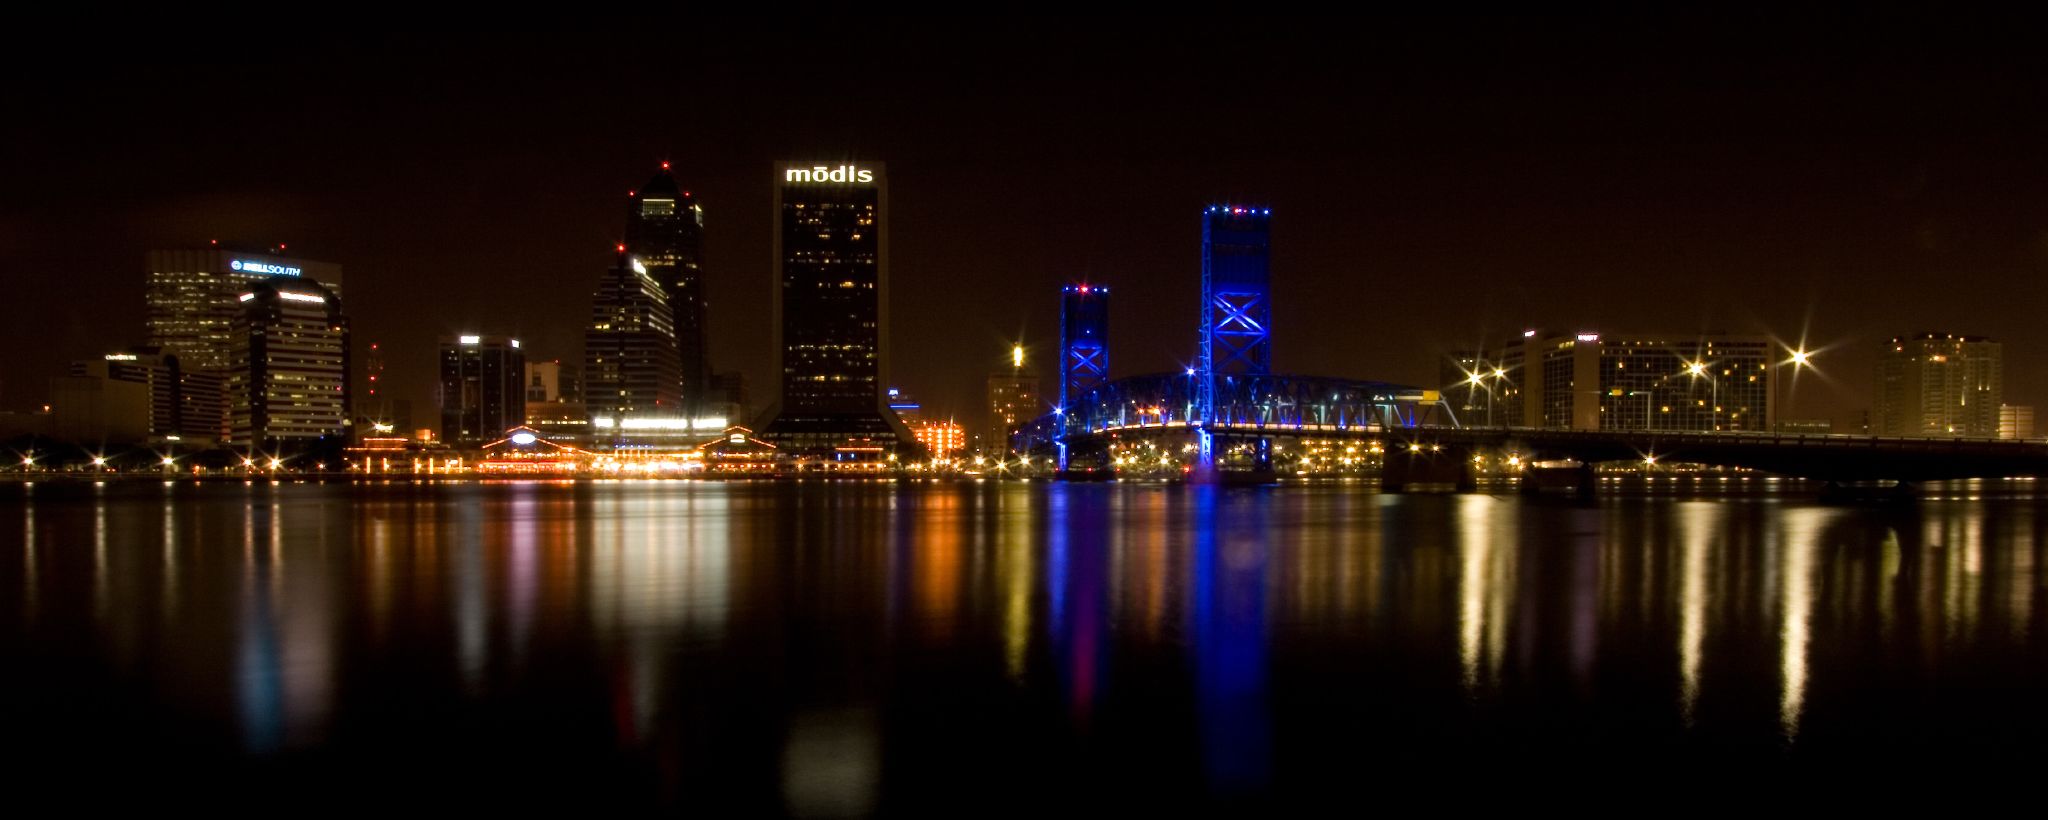 a nighttime view of a city from across the river